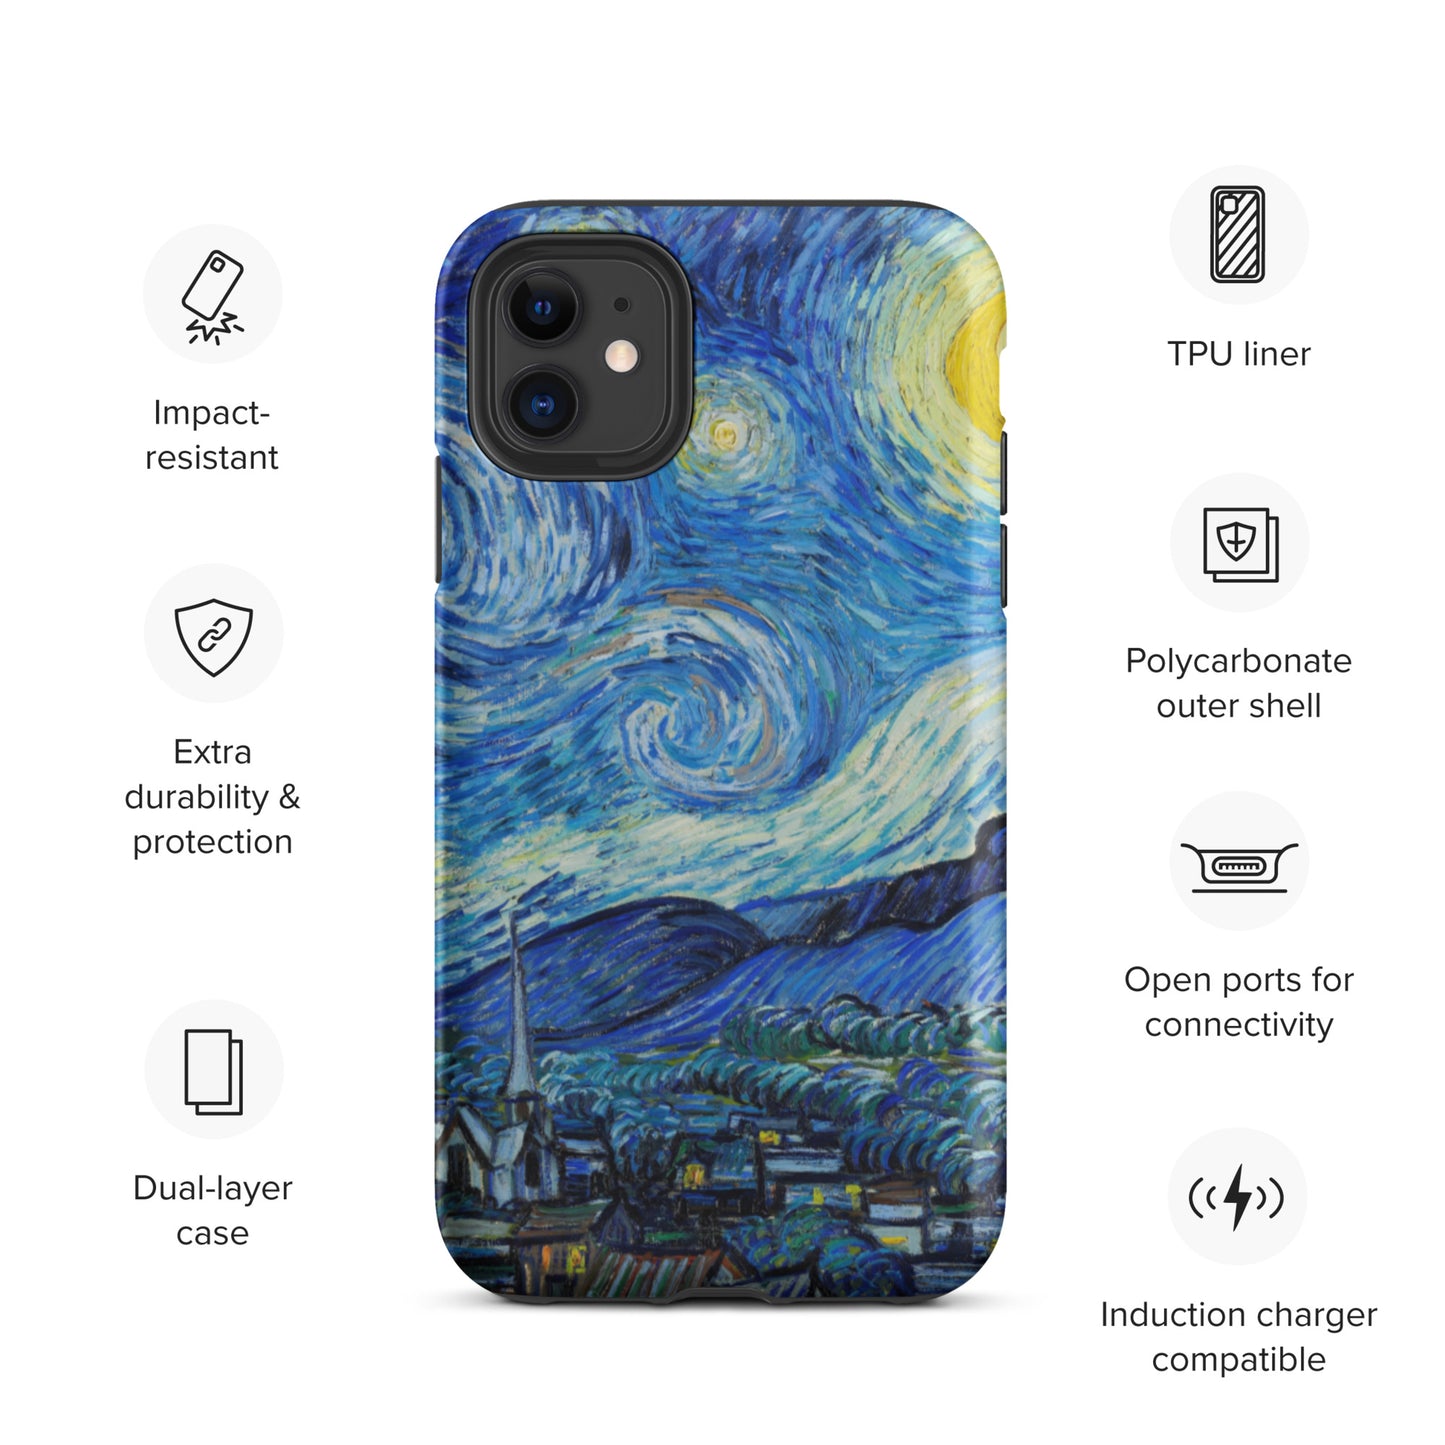 Starry Night - Tough iPhone case